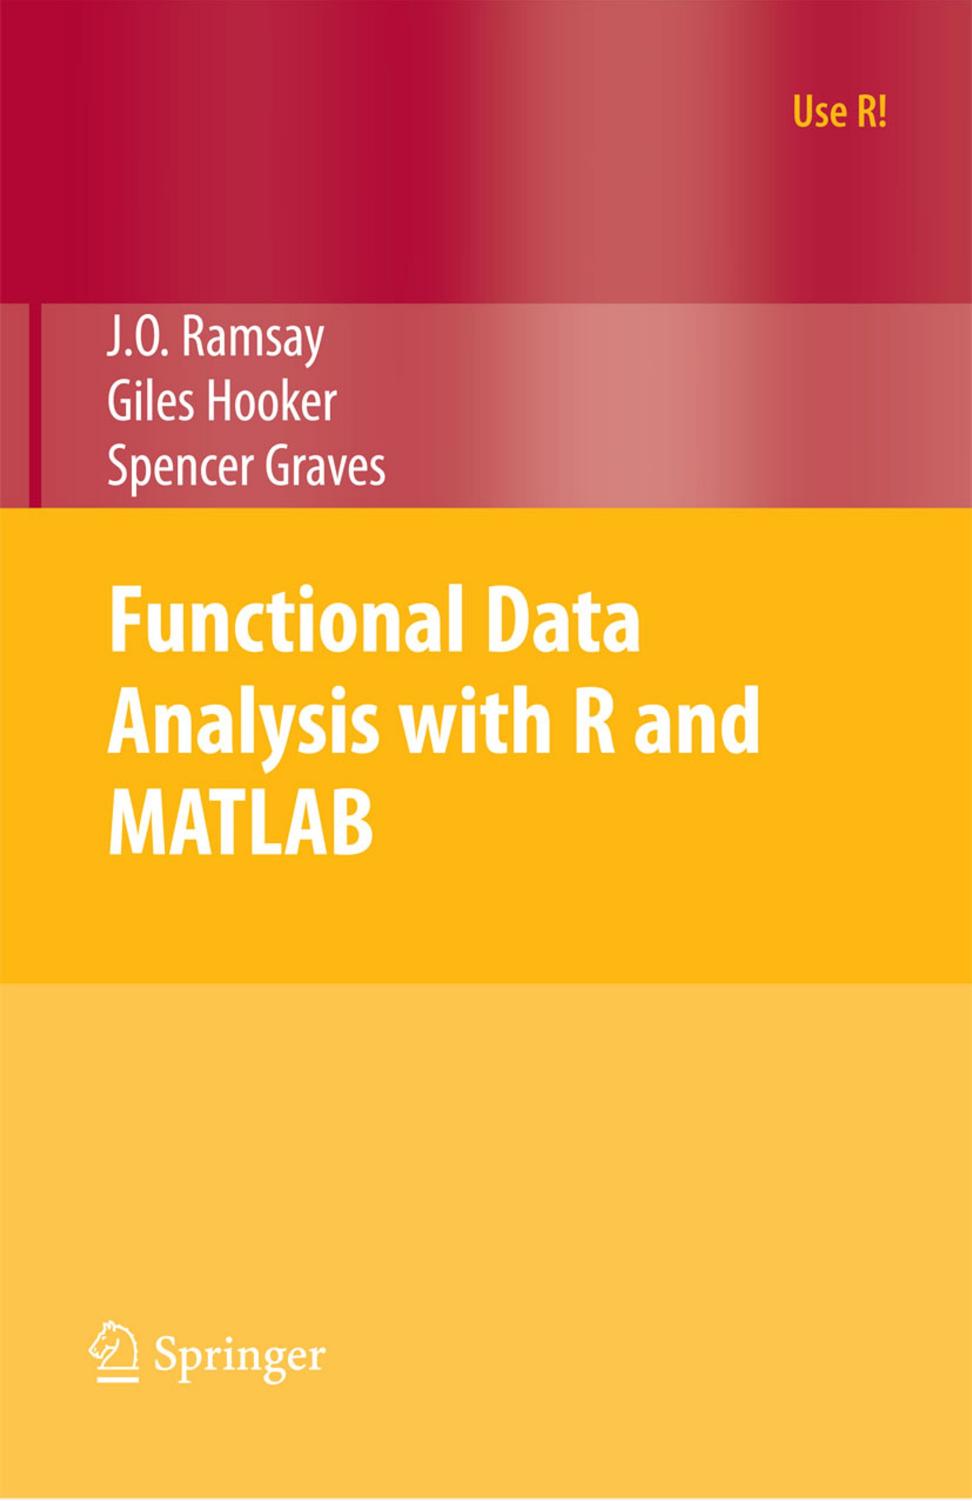 Functional Data Analysis with R and MATLAB (use R)